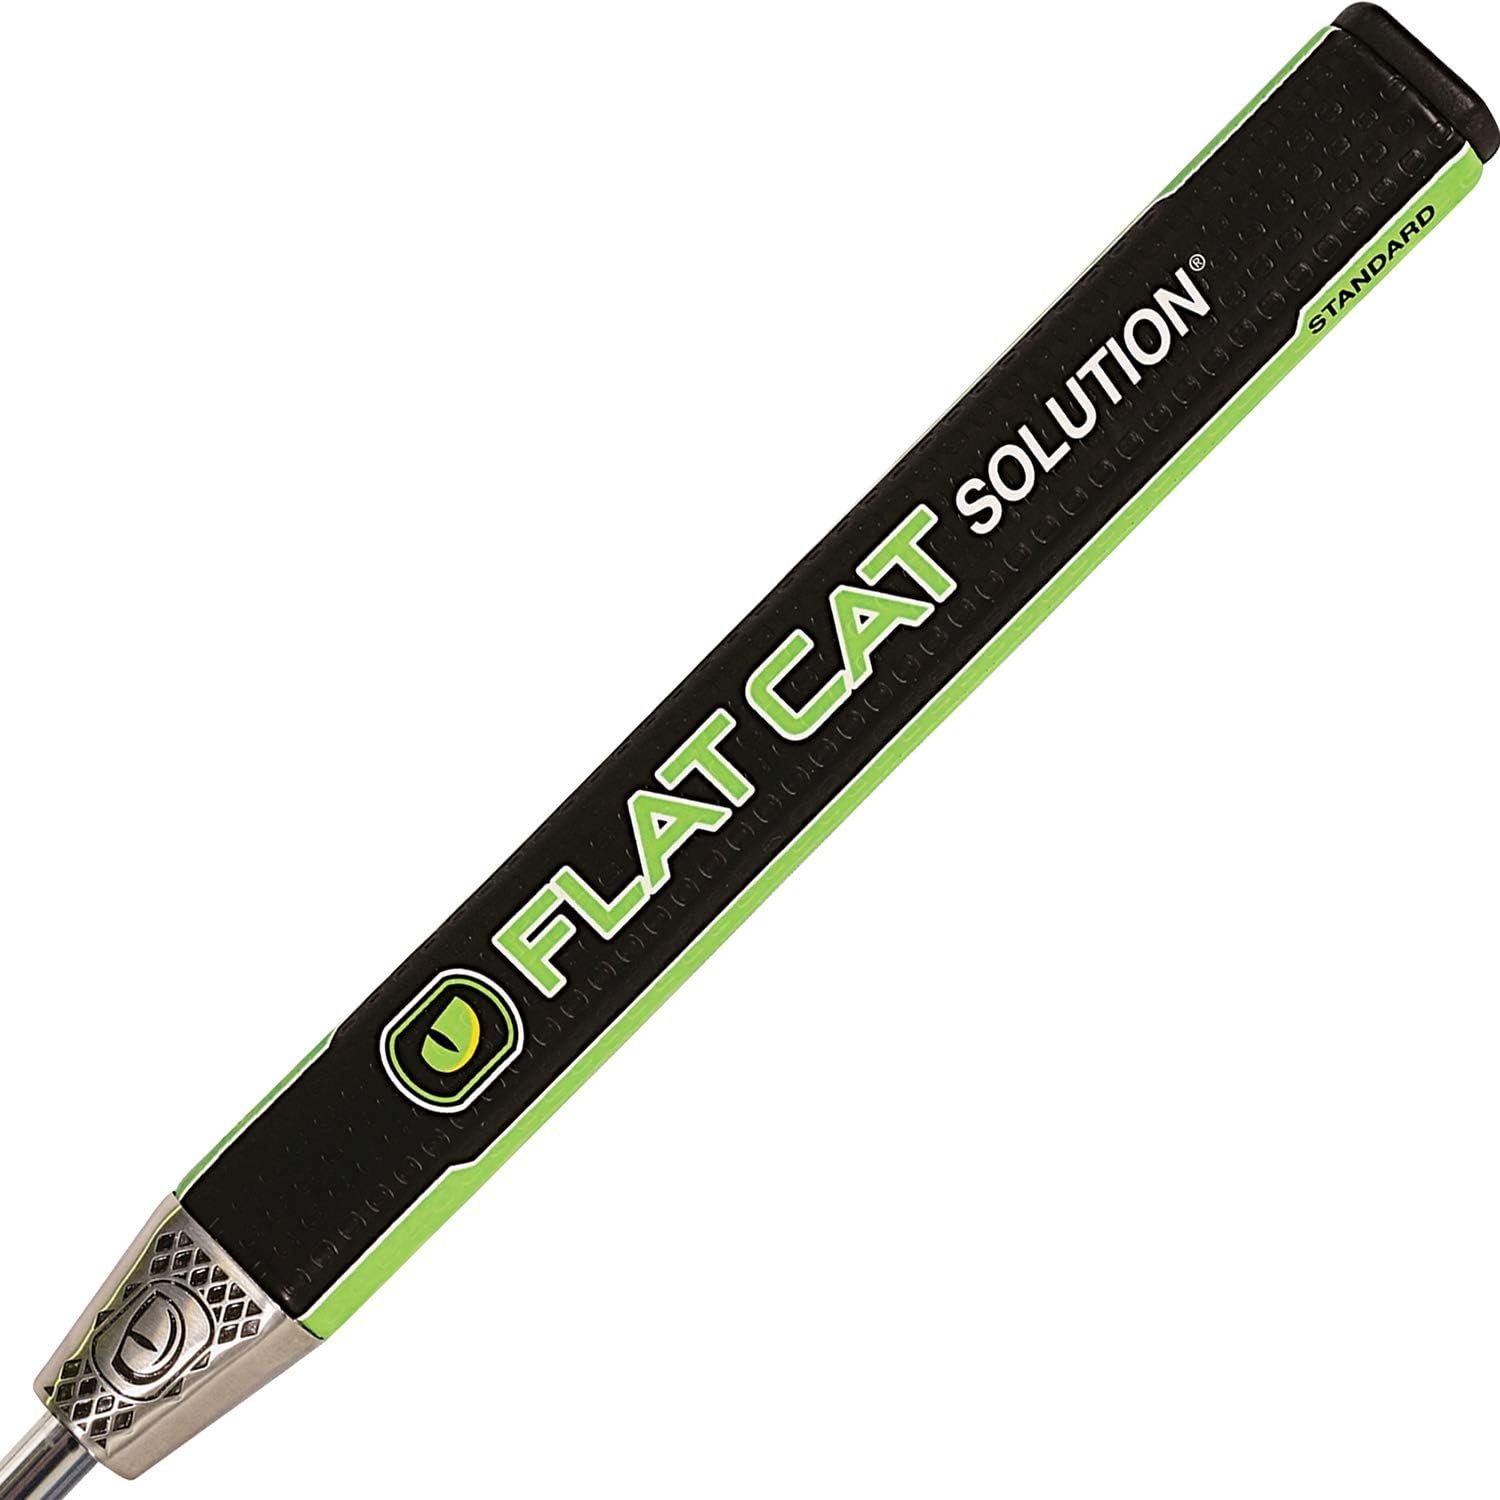 FLAT CAT Solution Putter Grip Svelte, Weighted Grip Reduces The Yips, Oversized Non-Tapered Golf Grip, Flat Sides Put The Putter Face in The Palm of Your Hand